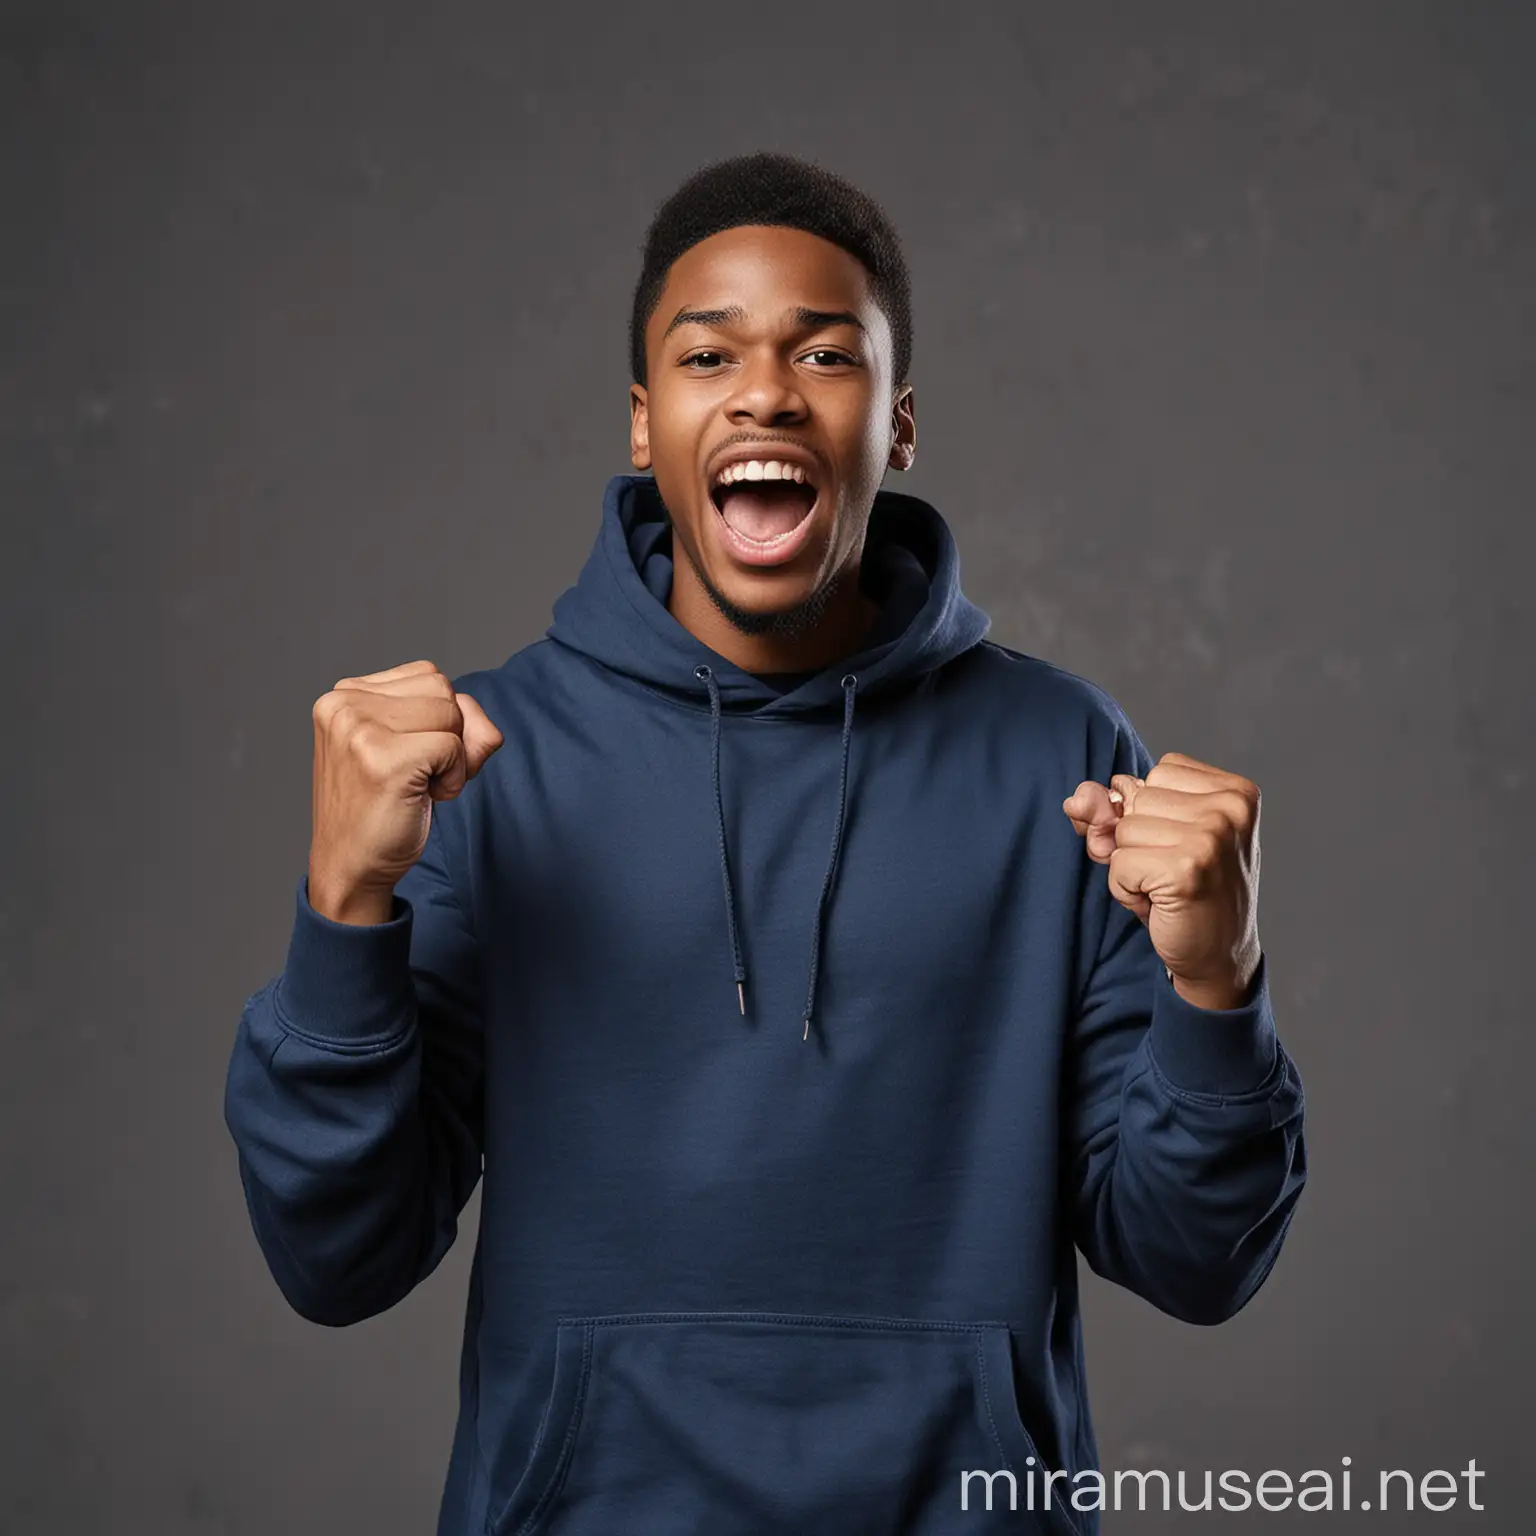  African American young man celebrating enthusiastically with clenched fists in the air, wearing a dark blue sweatshirt , standing against gray space, facing camera